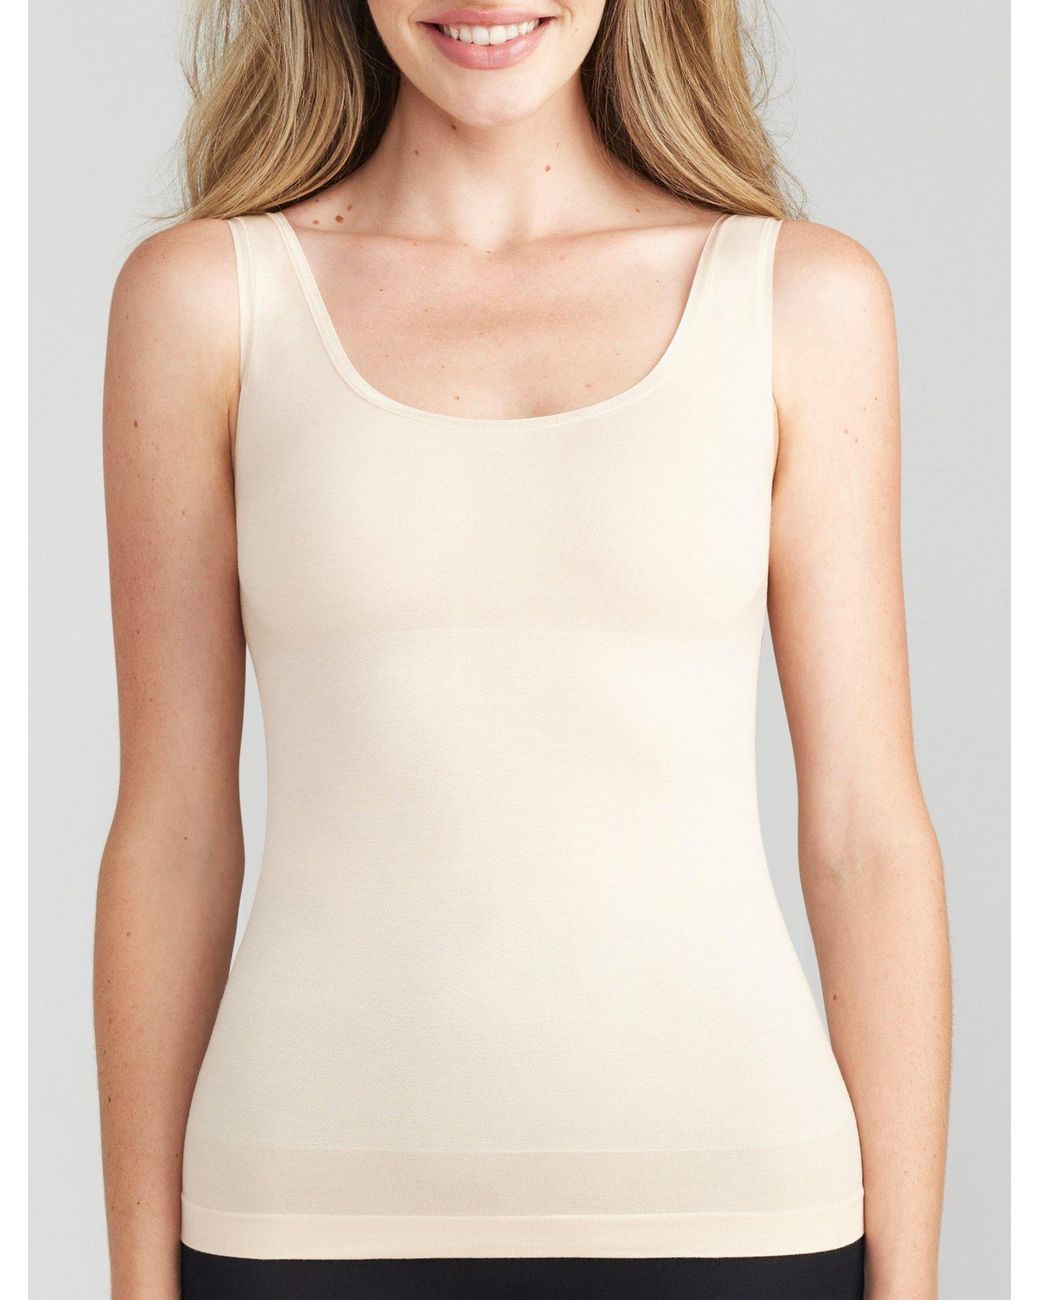 Talbots Yummie Tummie® 2-way Shaping Tank Top in Natural